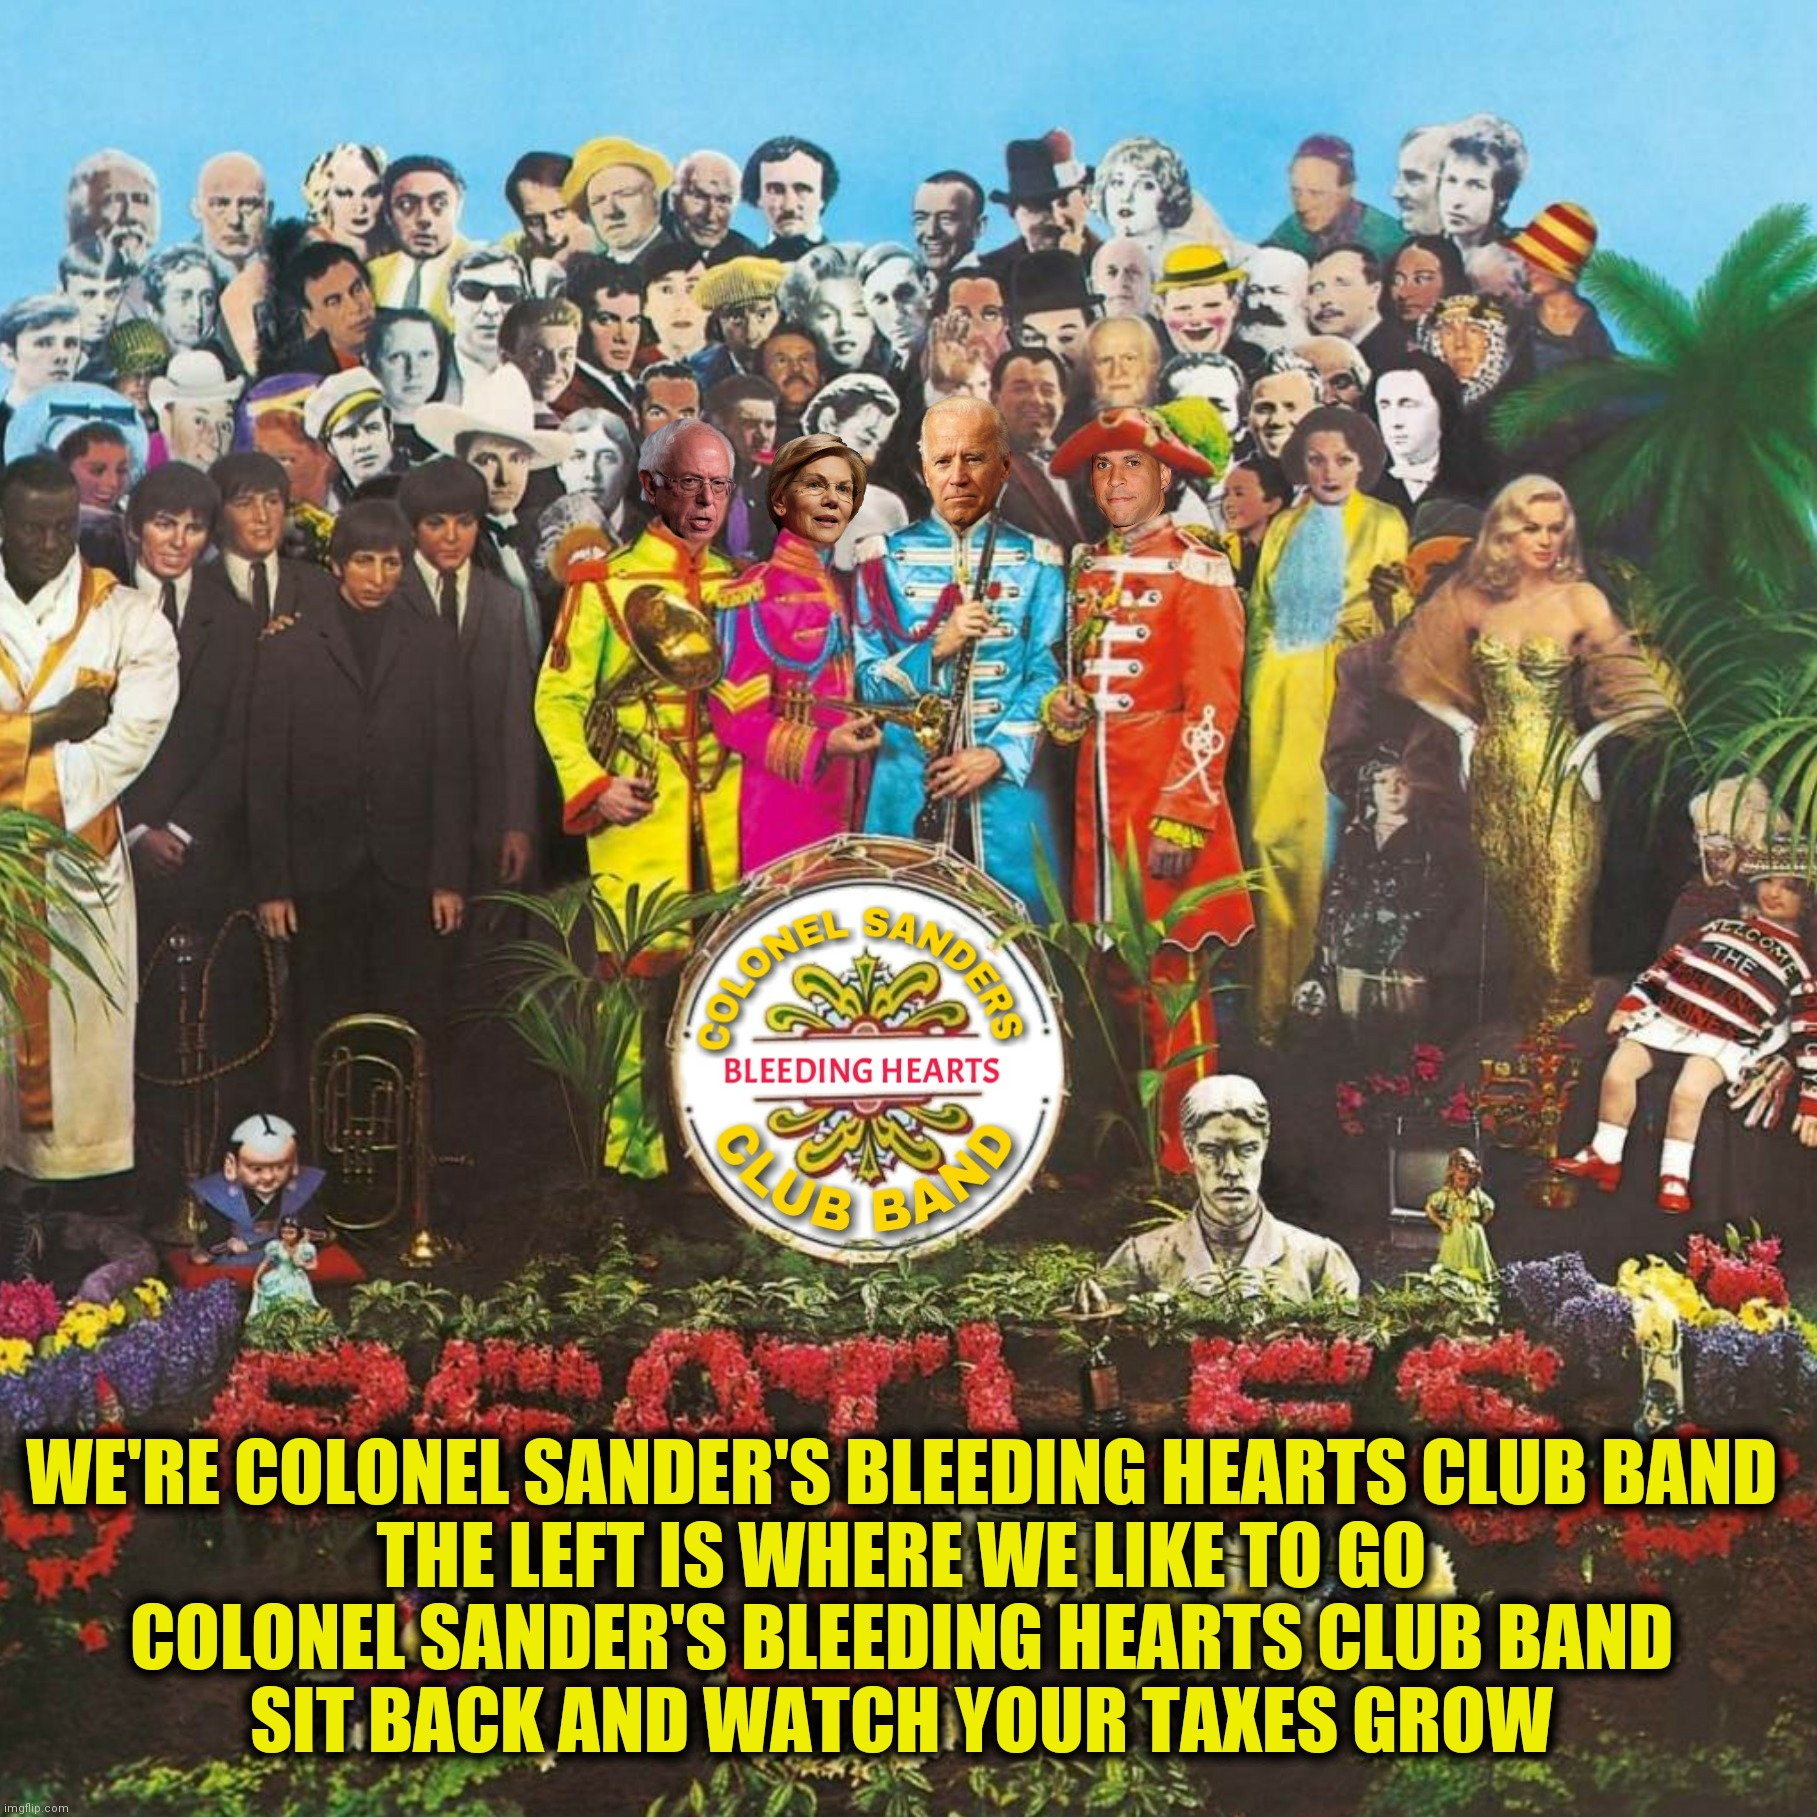 The singer's going to sing a song about left is right and right is wrong (Resubmission suggested by AvgJoeShmoe) | WE'RE COLONEL SANDER'S BLEEDING HEARTS CLUB BAND 
THE LEFT IS WHERE WE LIKE TO GO 
COLONEL SANDER'S BLEEDING HEARTS CLUB BAND 
SIT BACK AND WATCH YOUR TAXES GROW | image tagged in bad photoshop,bernie sanders,joe biden,elizabeth warren,cory booker | made w/ Imgflip meme maker